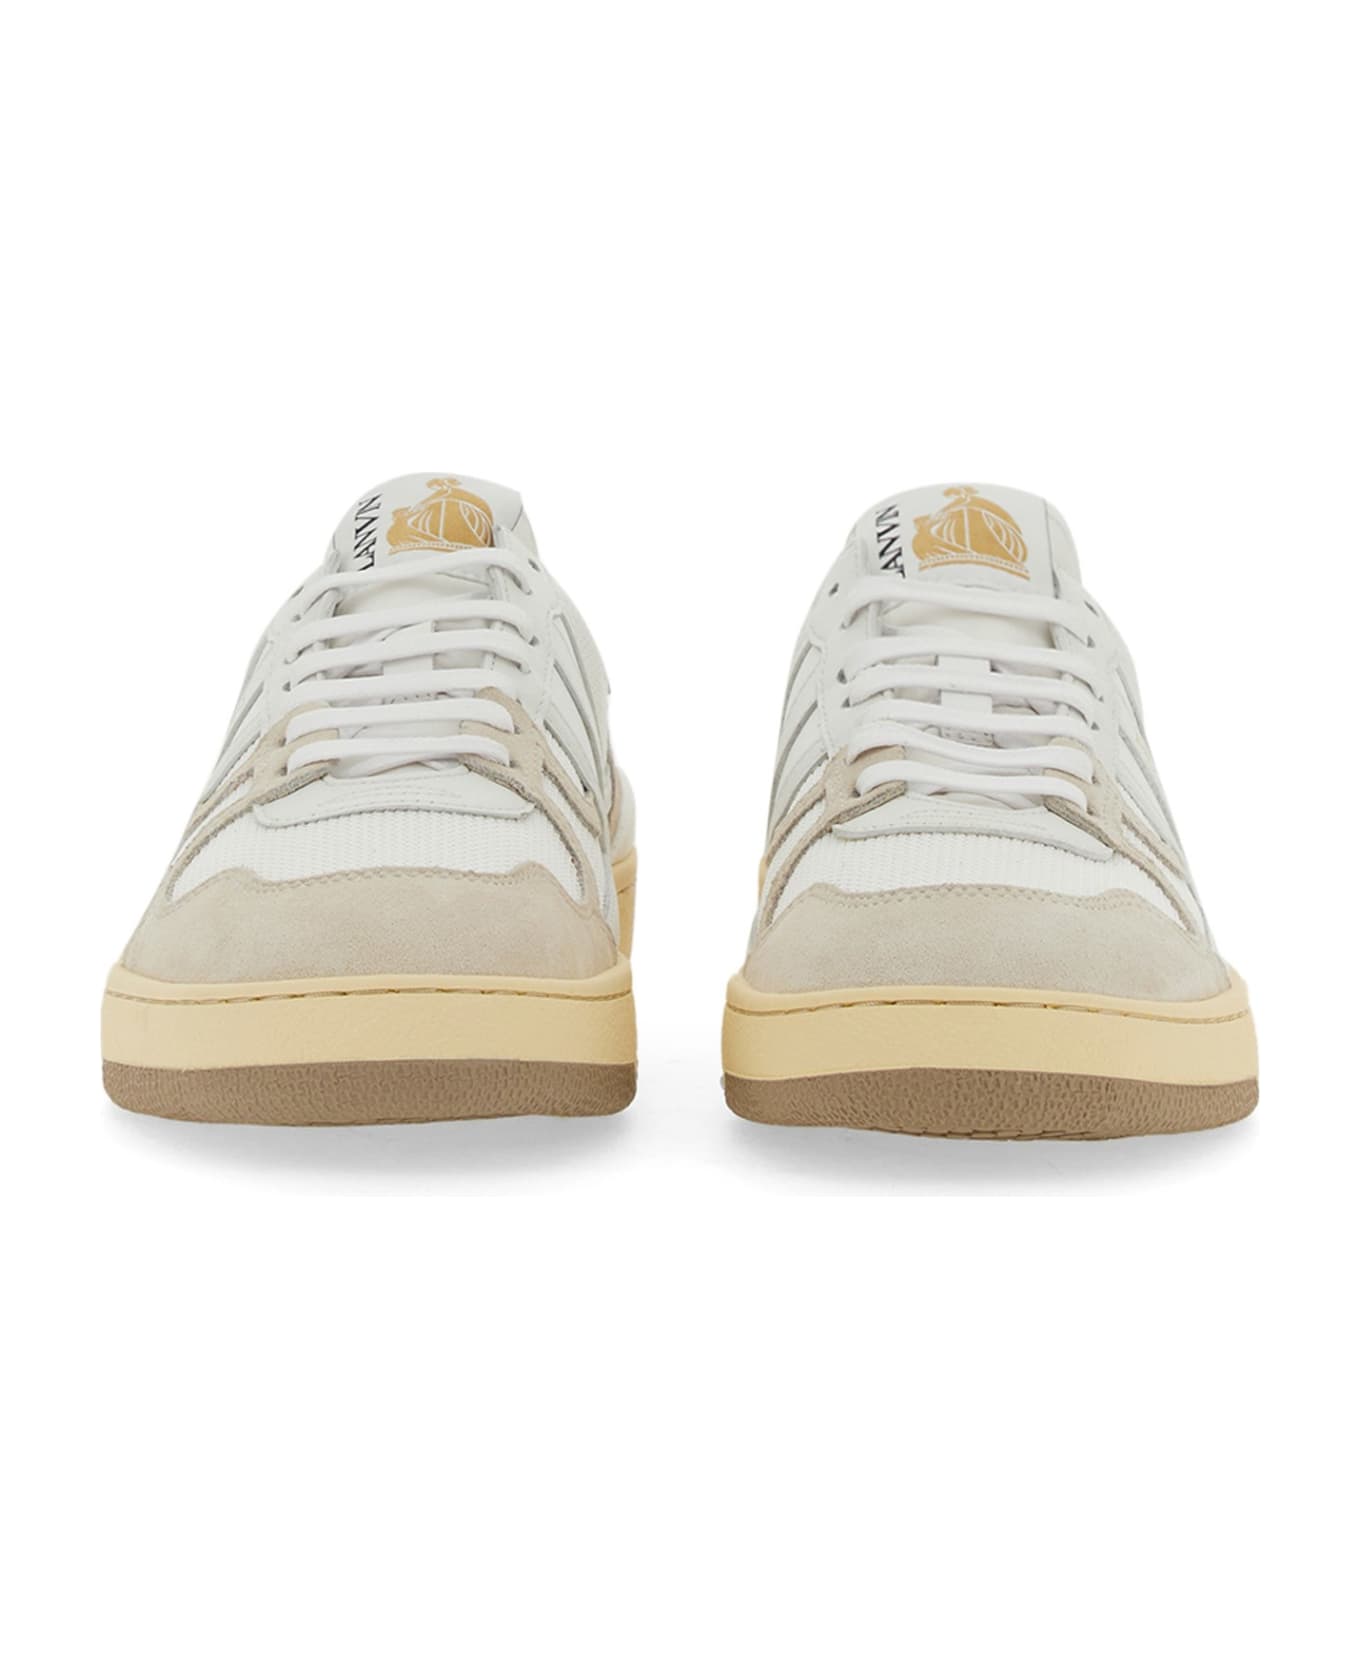 Lanvin Mesh, Suede And Nappa Leather Sneaker - Bianco